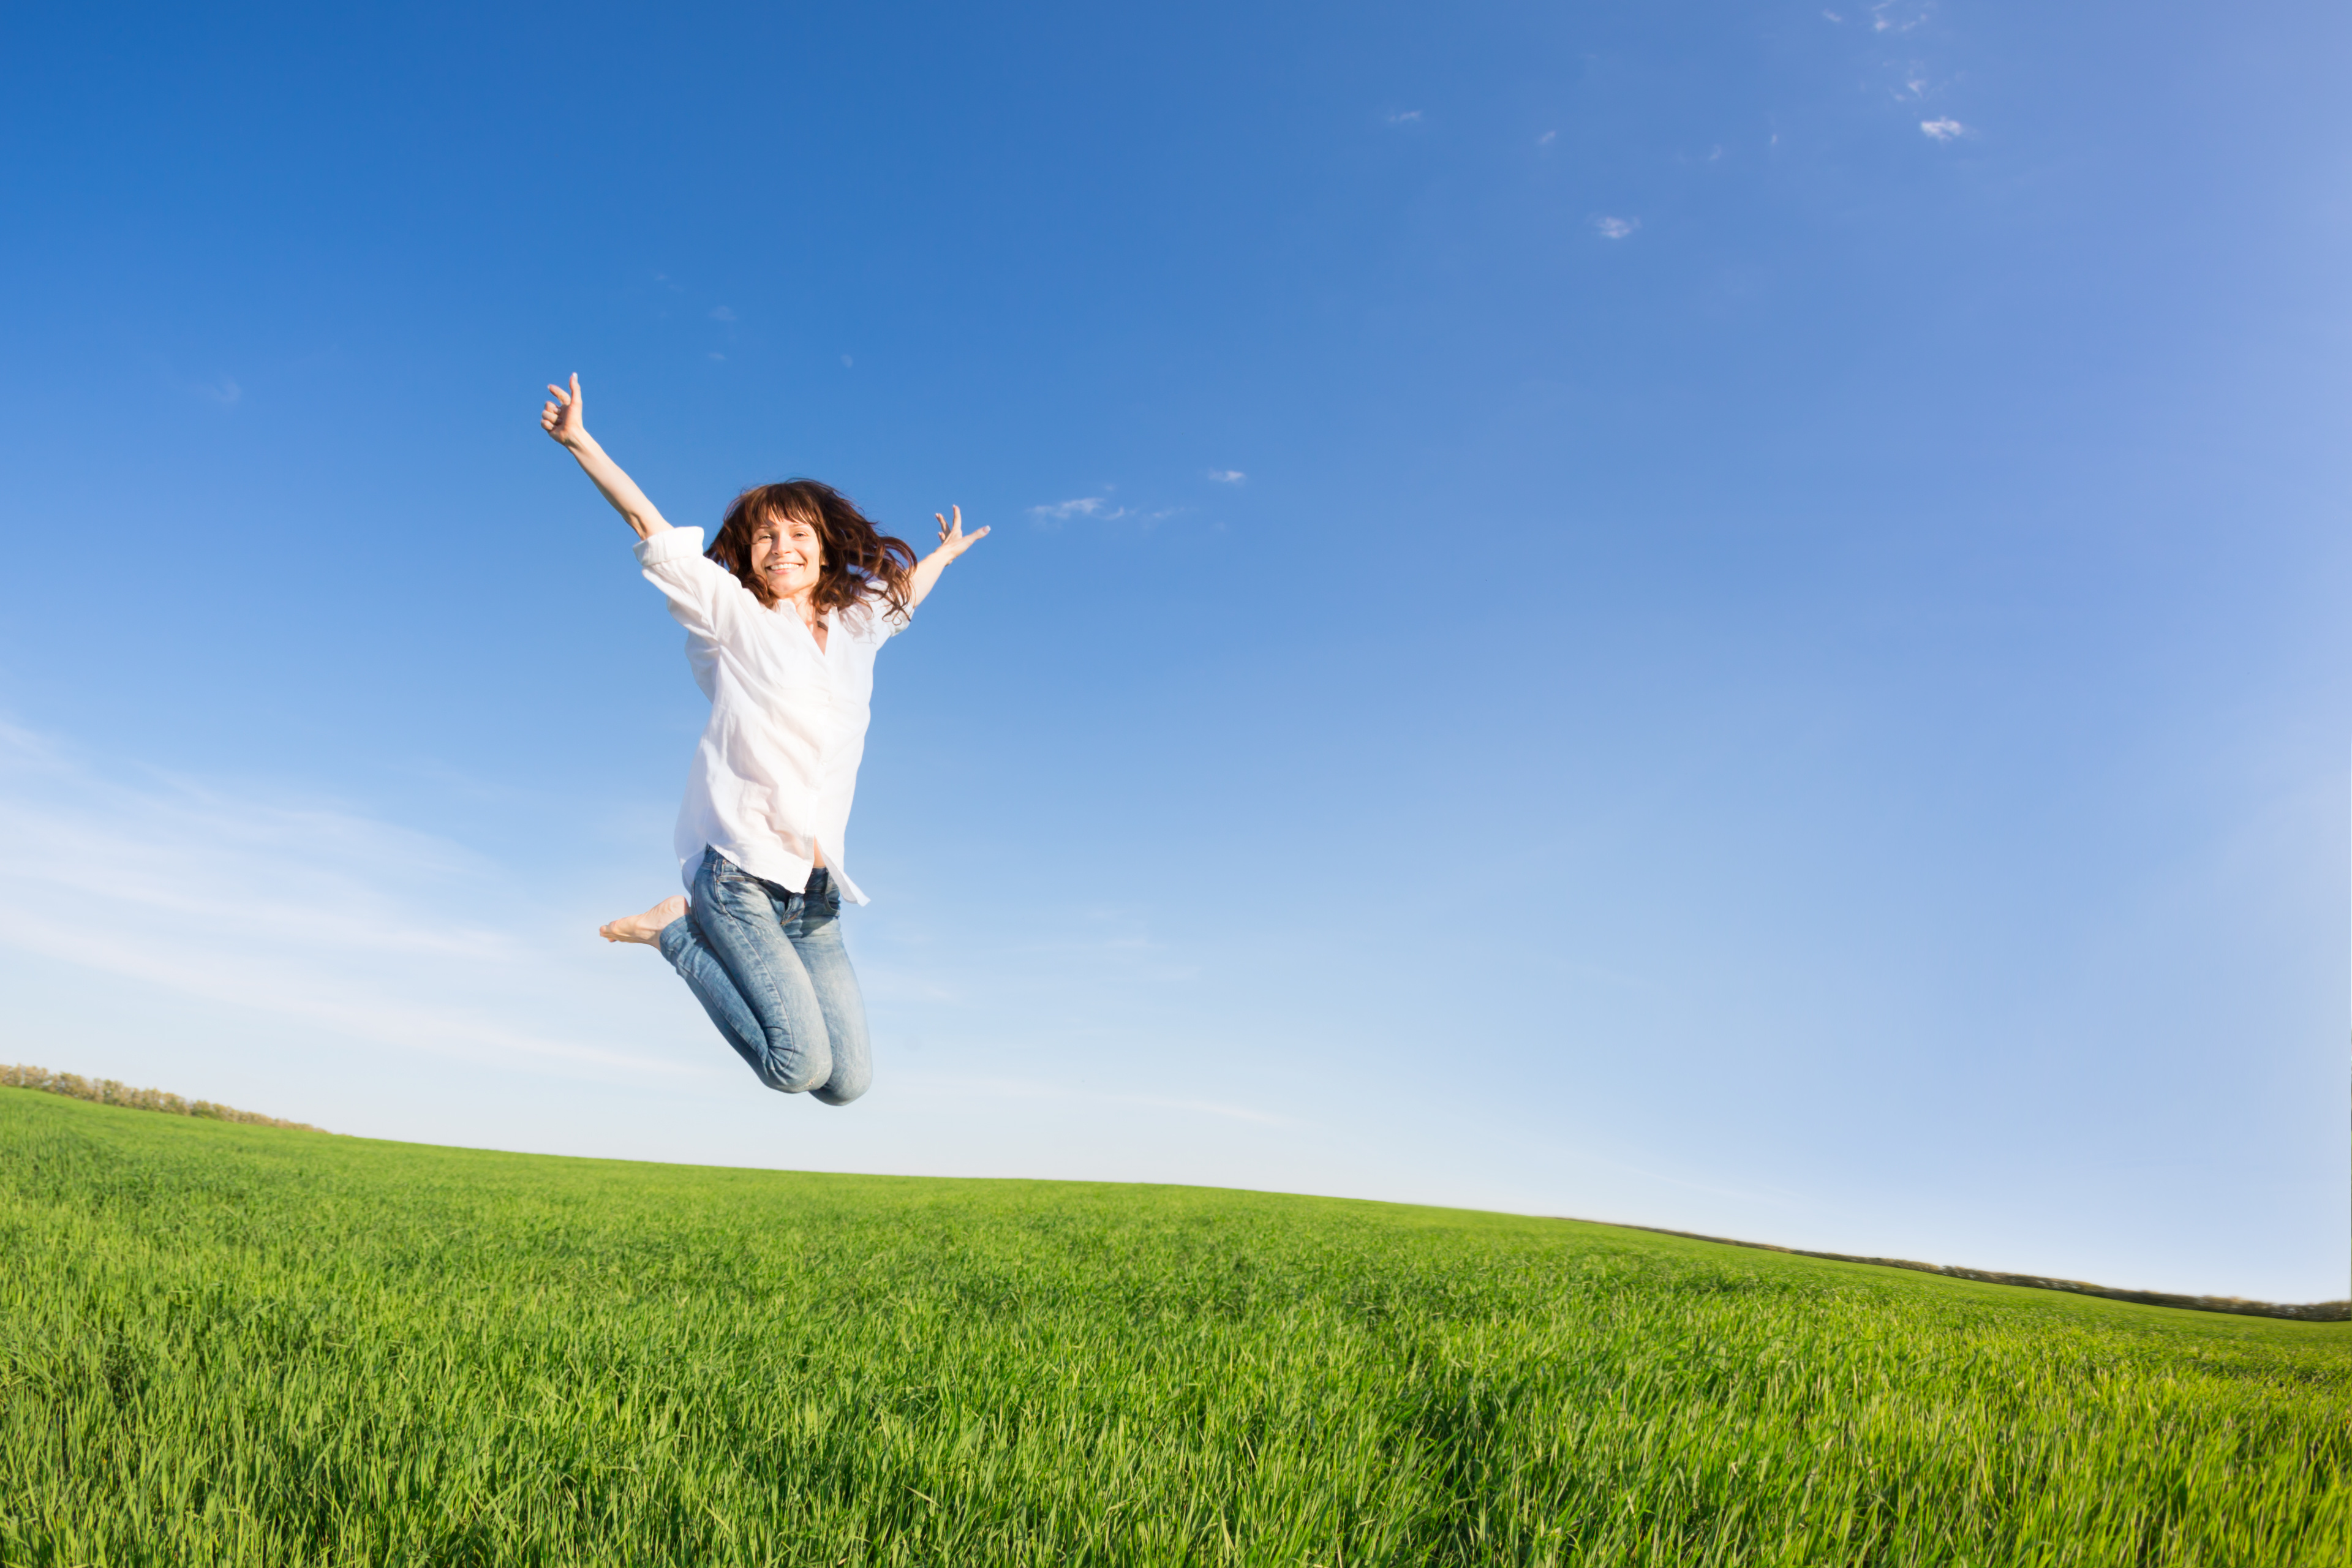 Happy woman jumping in green field against blue sky. Summer vacation concept